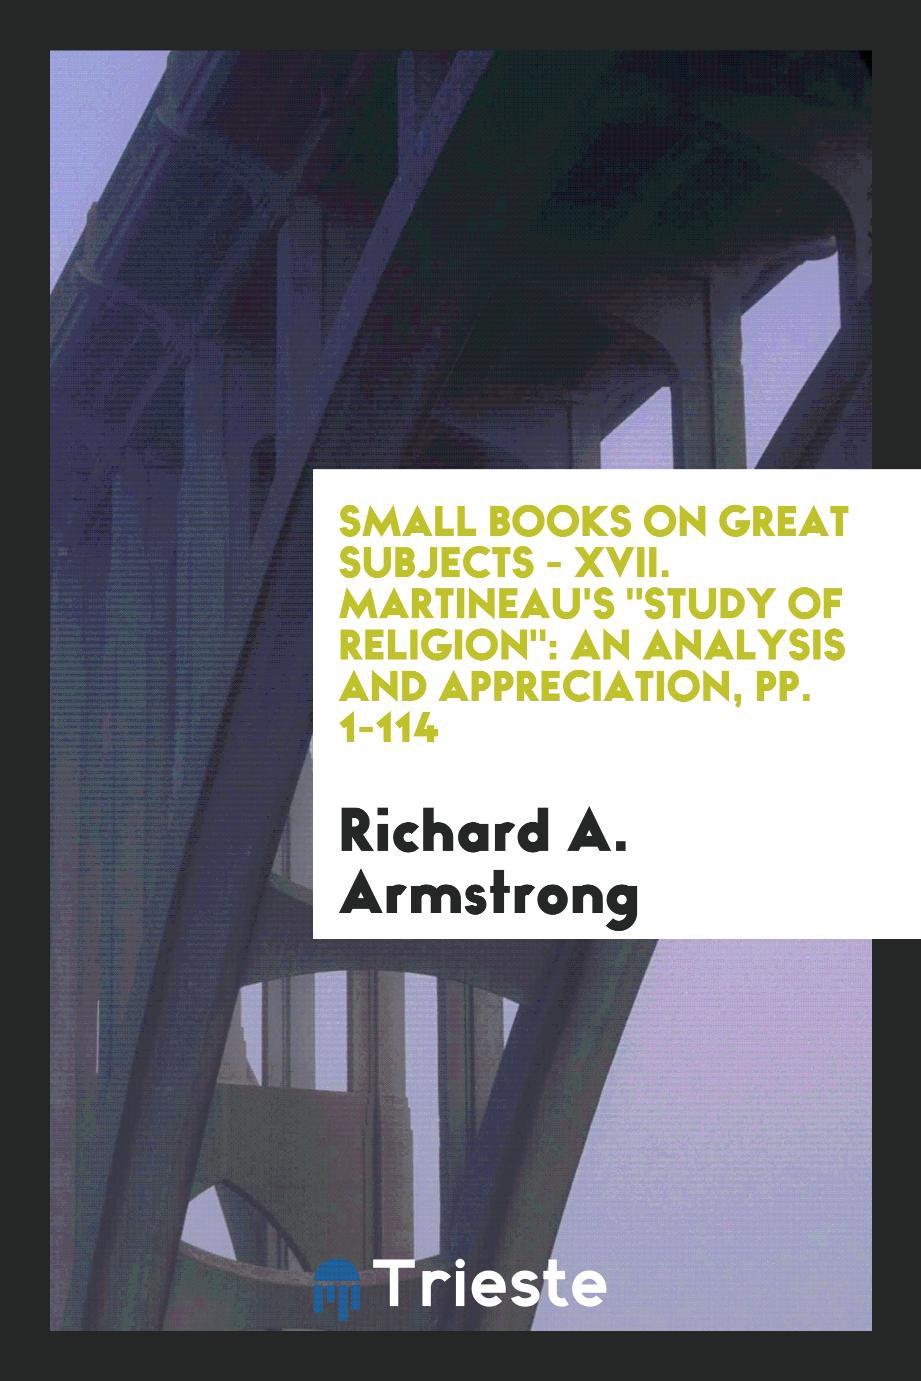 Small Books on Great Subjects - XVII. Martineau's "Study of Religion": An Analysis and Appreciation, pp. 1-114